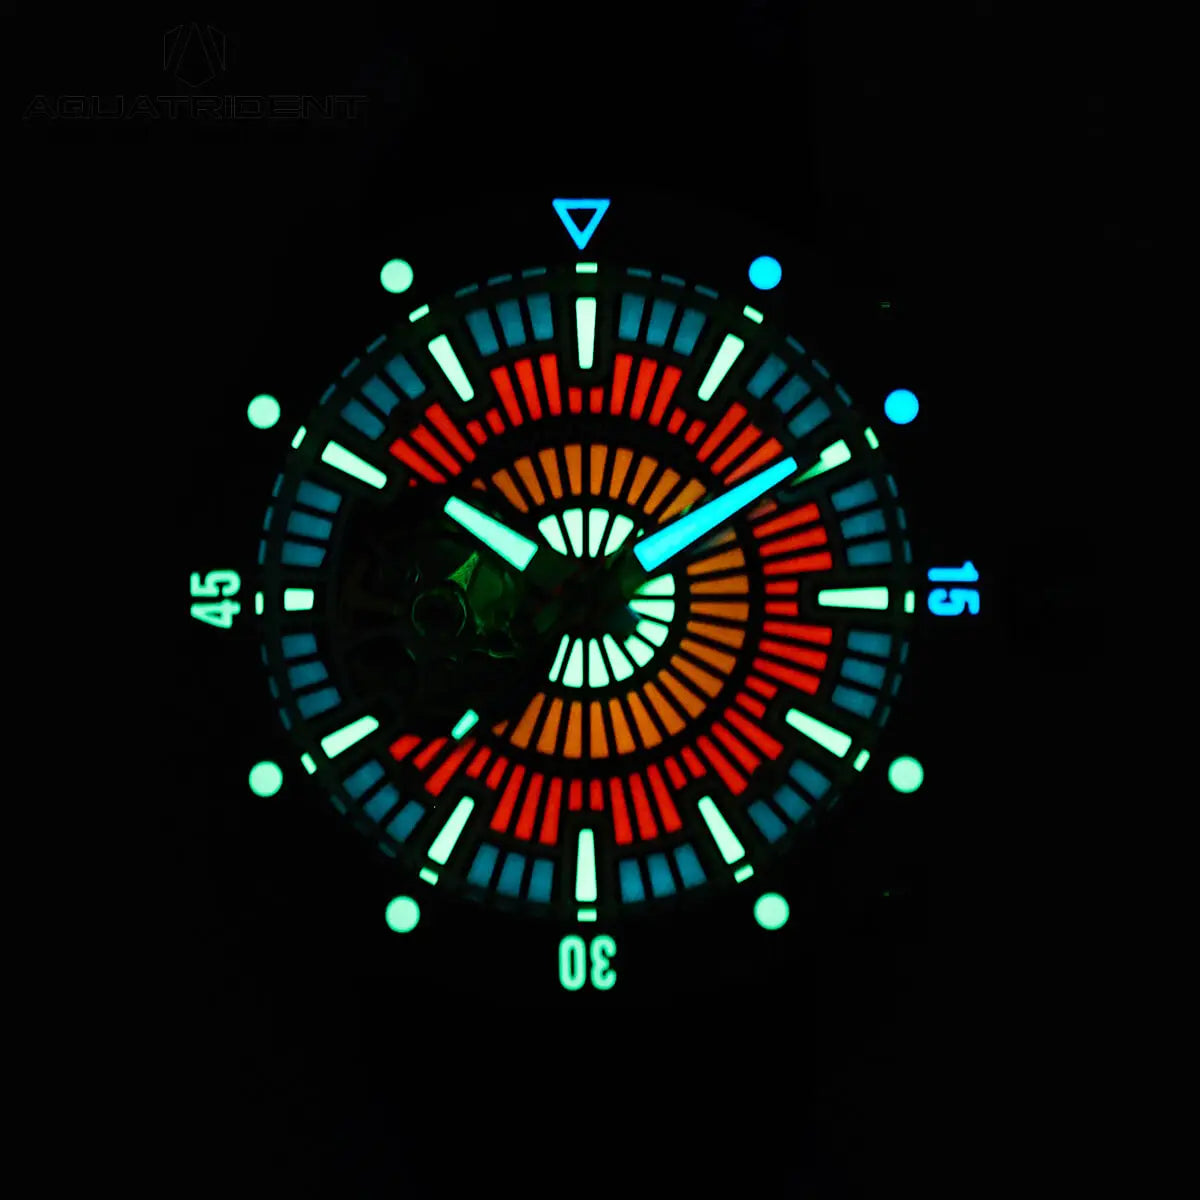 Colorful luminescence of the dial